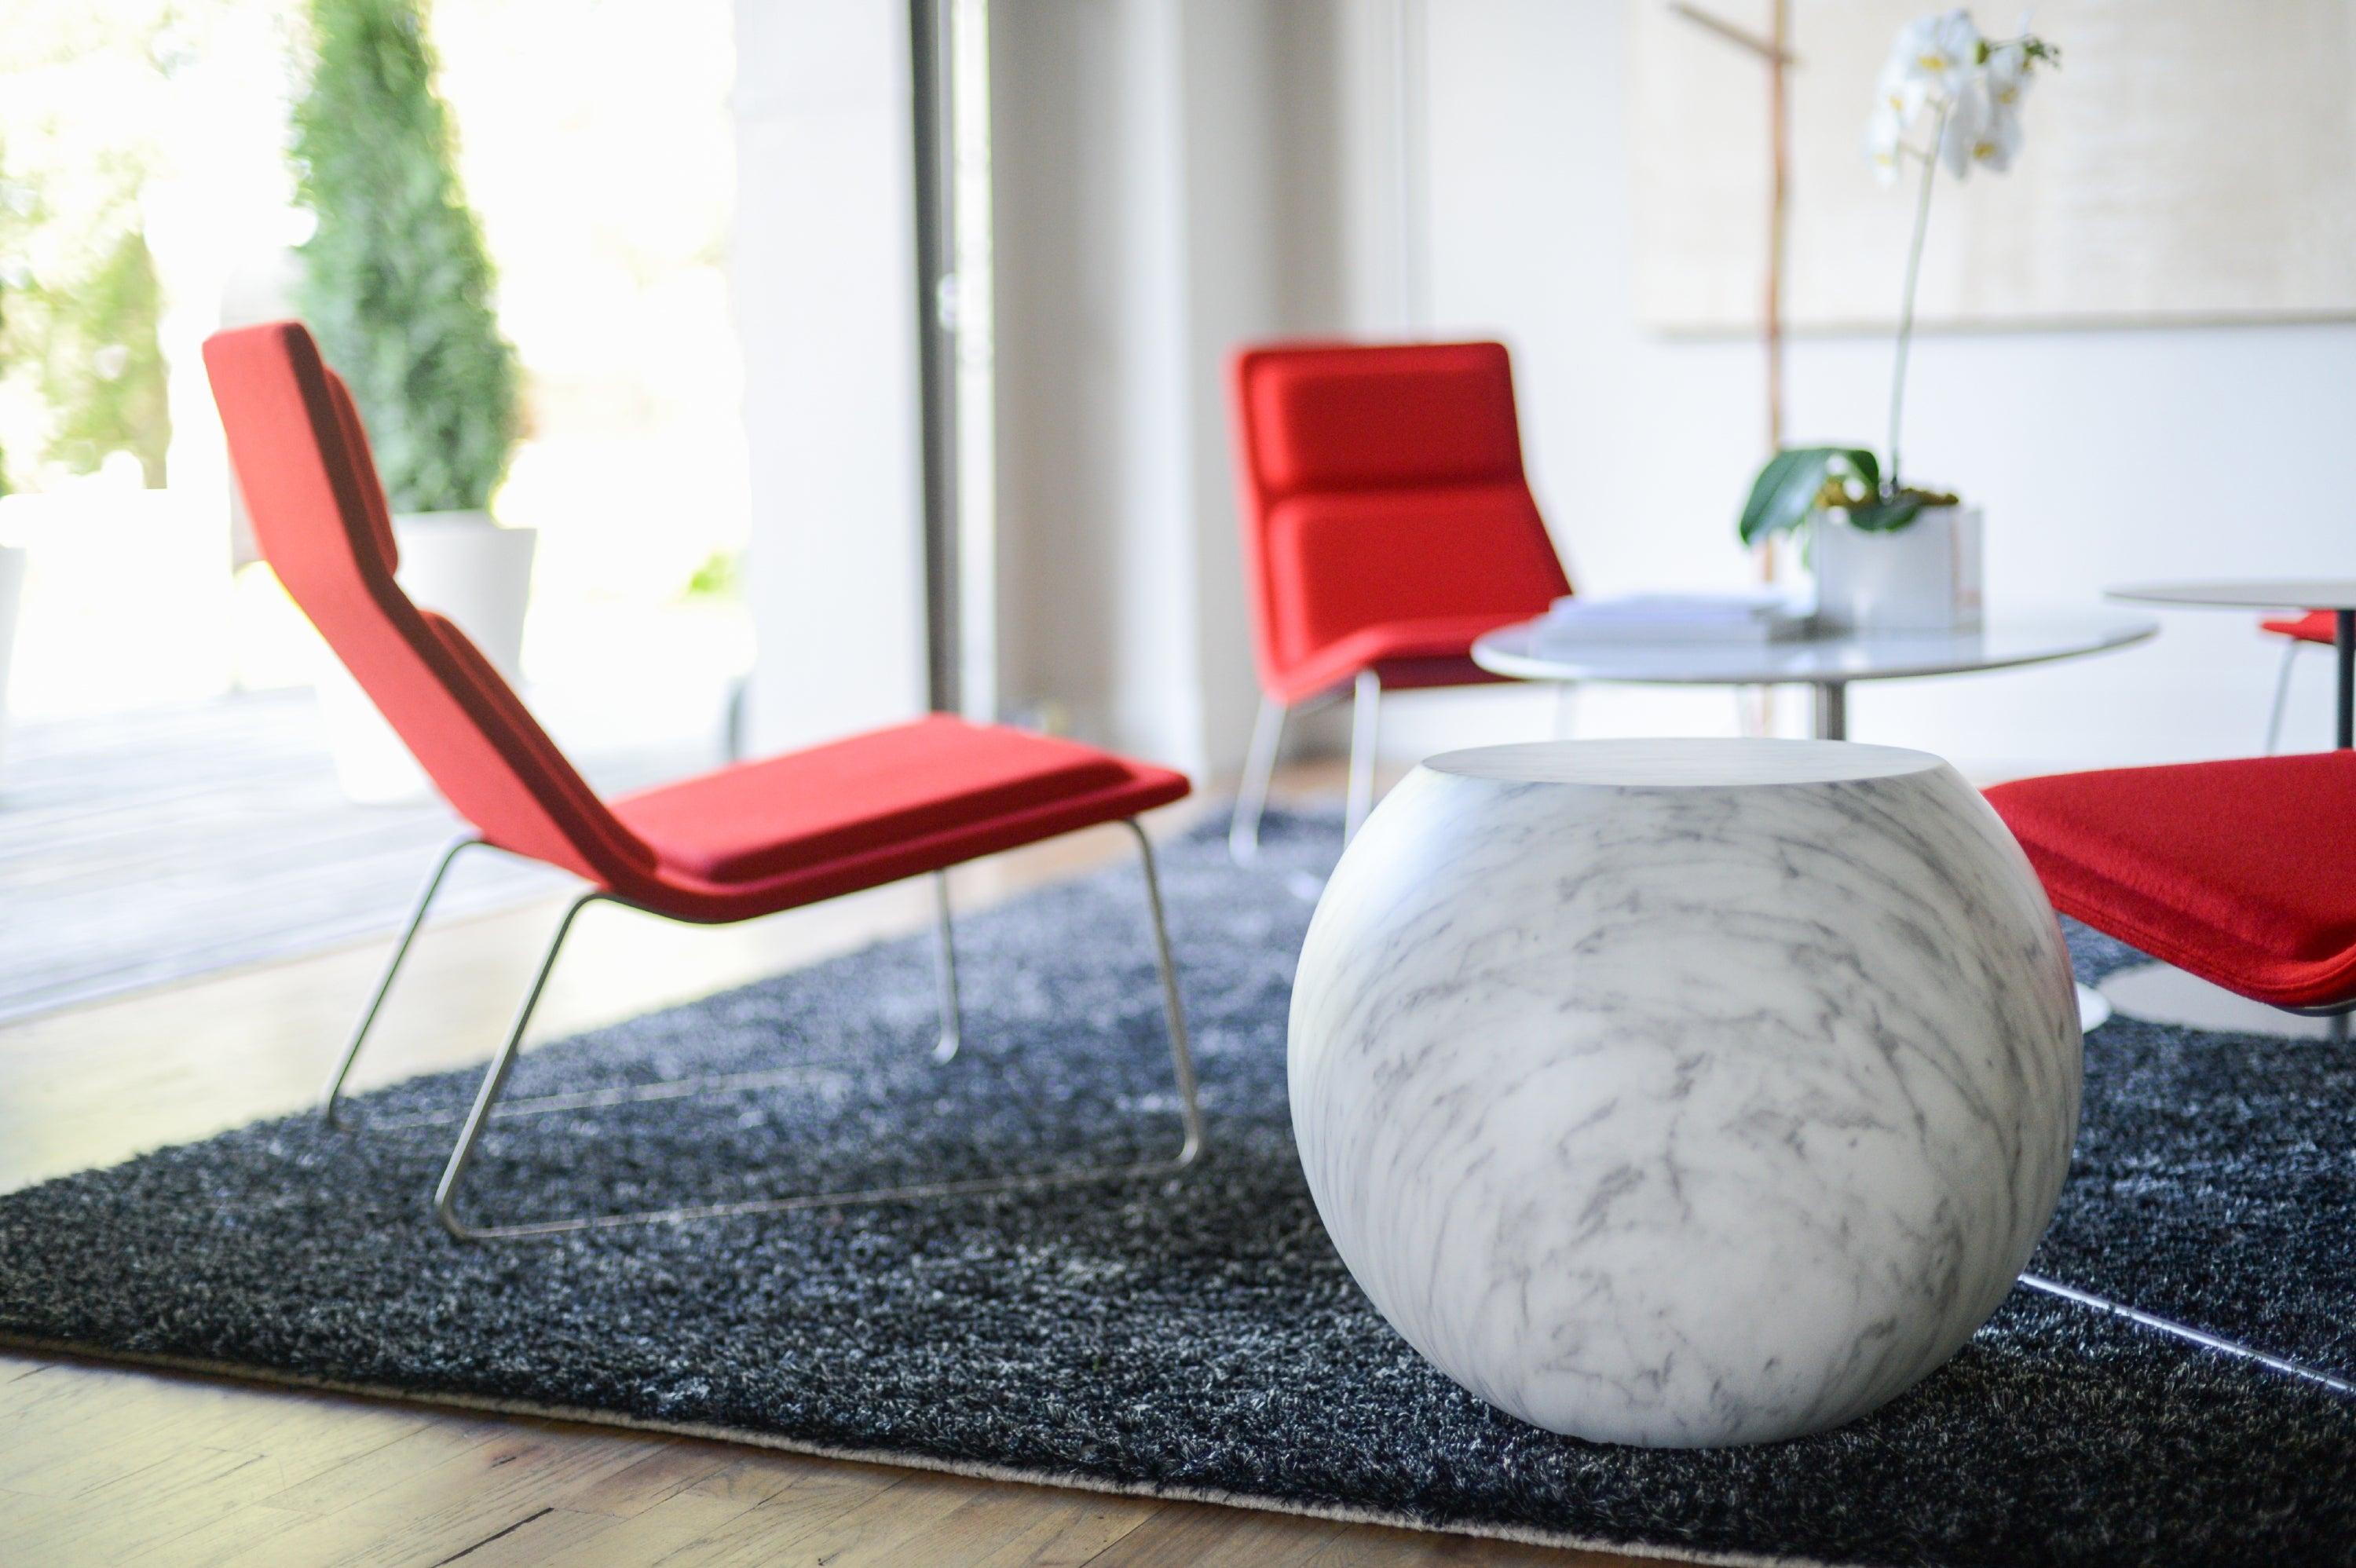 The perfect accent, with an ironic touch and eloquent presence, the Bong table by Giulio Cappellini is composed of a solid sphere and a round top. The Bong coffee table is available in several distinctive versions: fiberglass lacquered white,